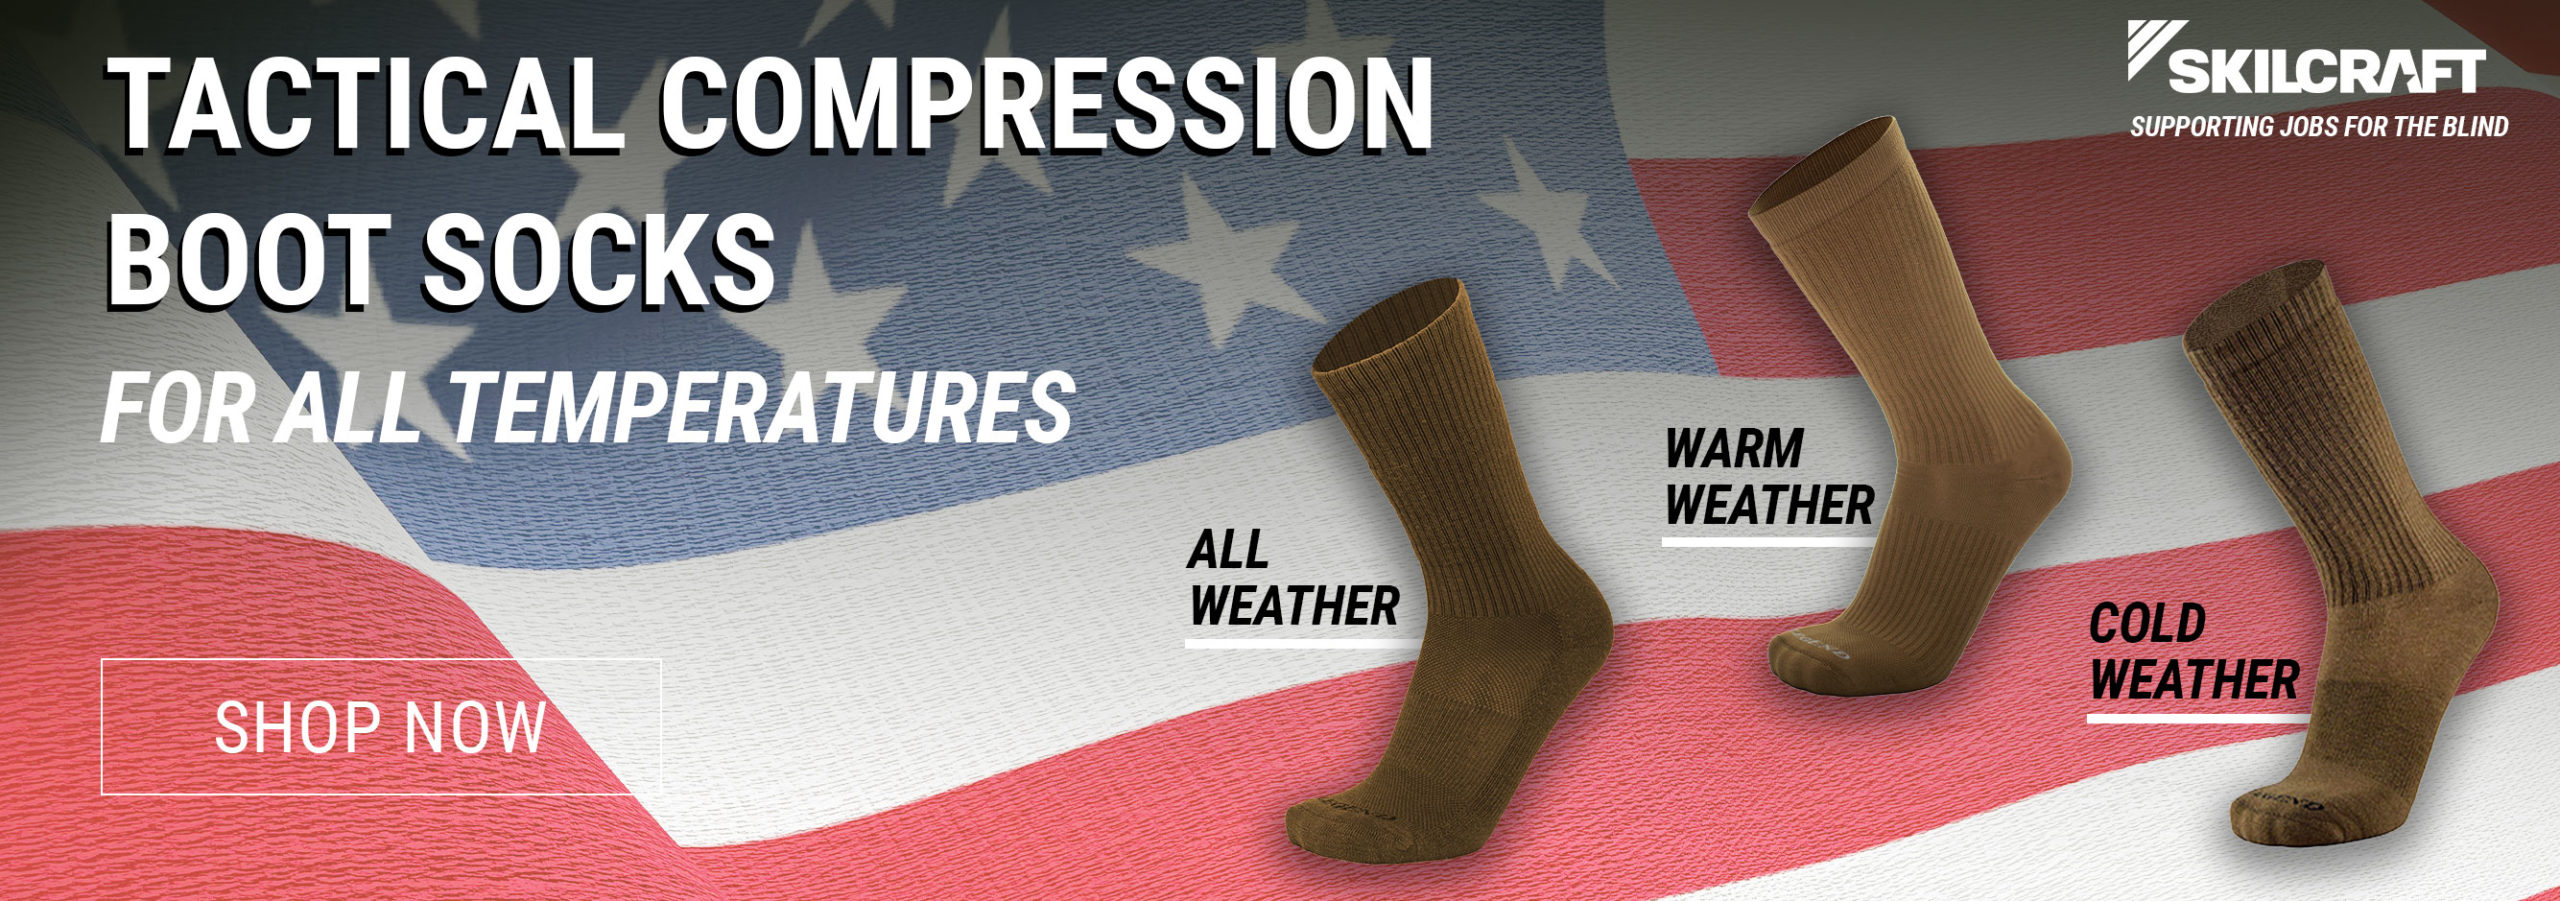 LEGEND all-weather socks with an American flag background.